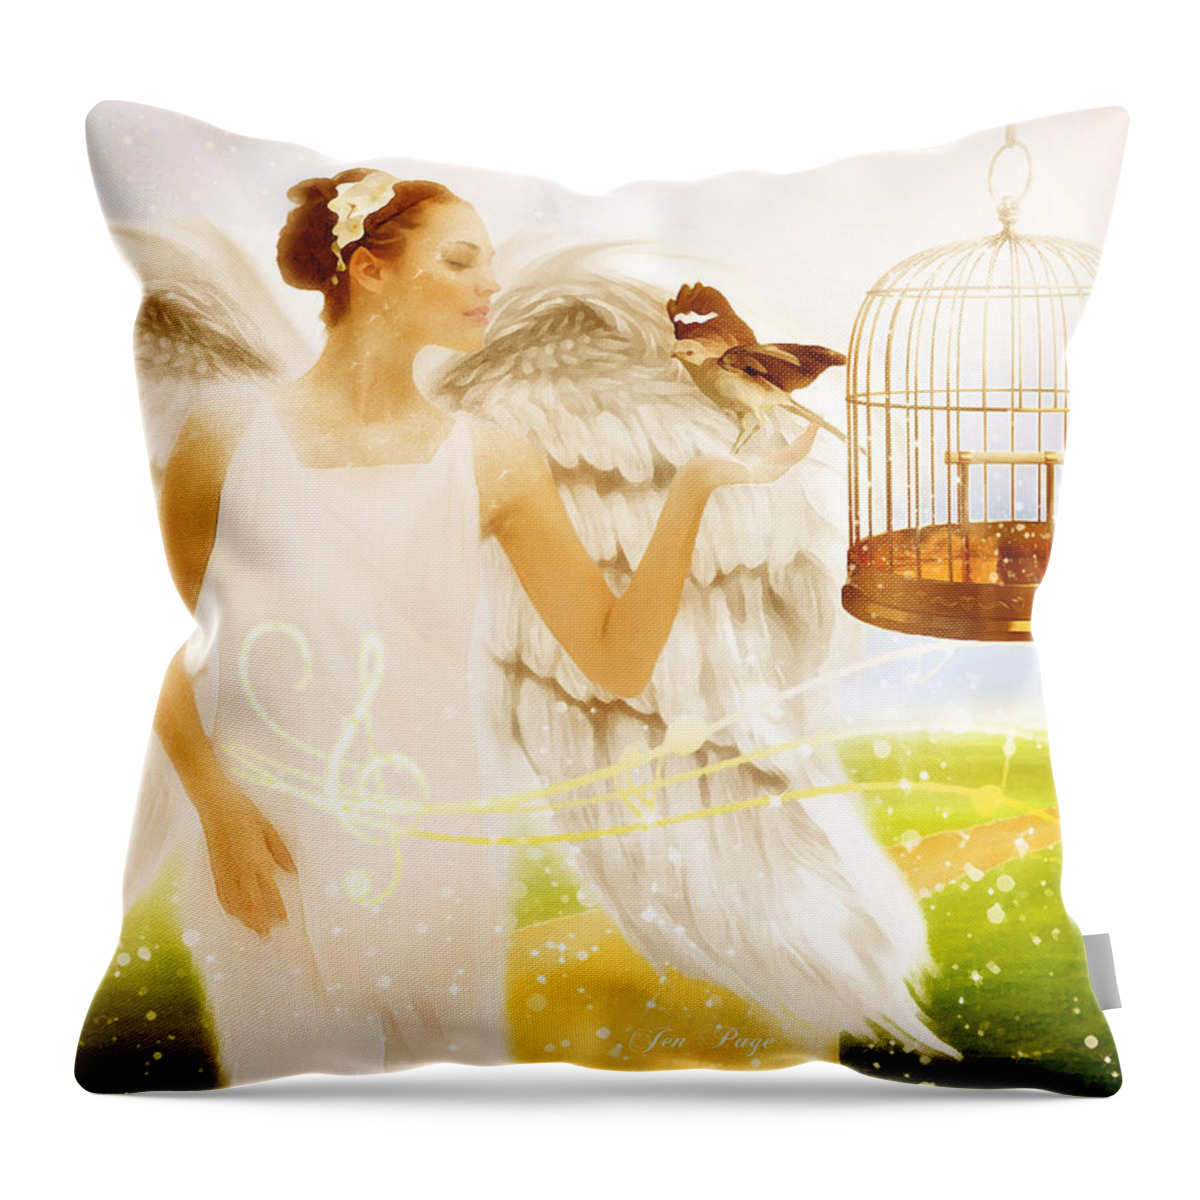 Freedom Song Throw Pillow featuring the digital art Freedom Song by Jennifer Page